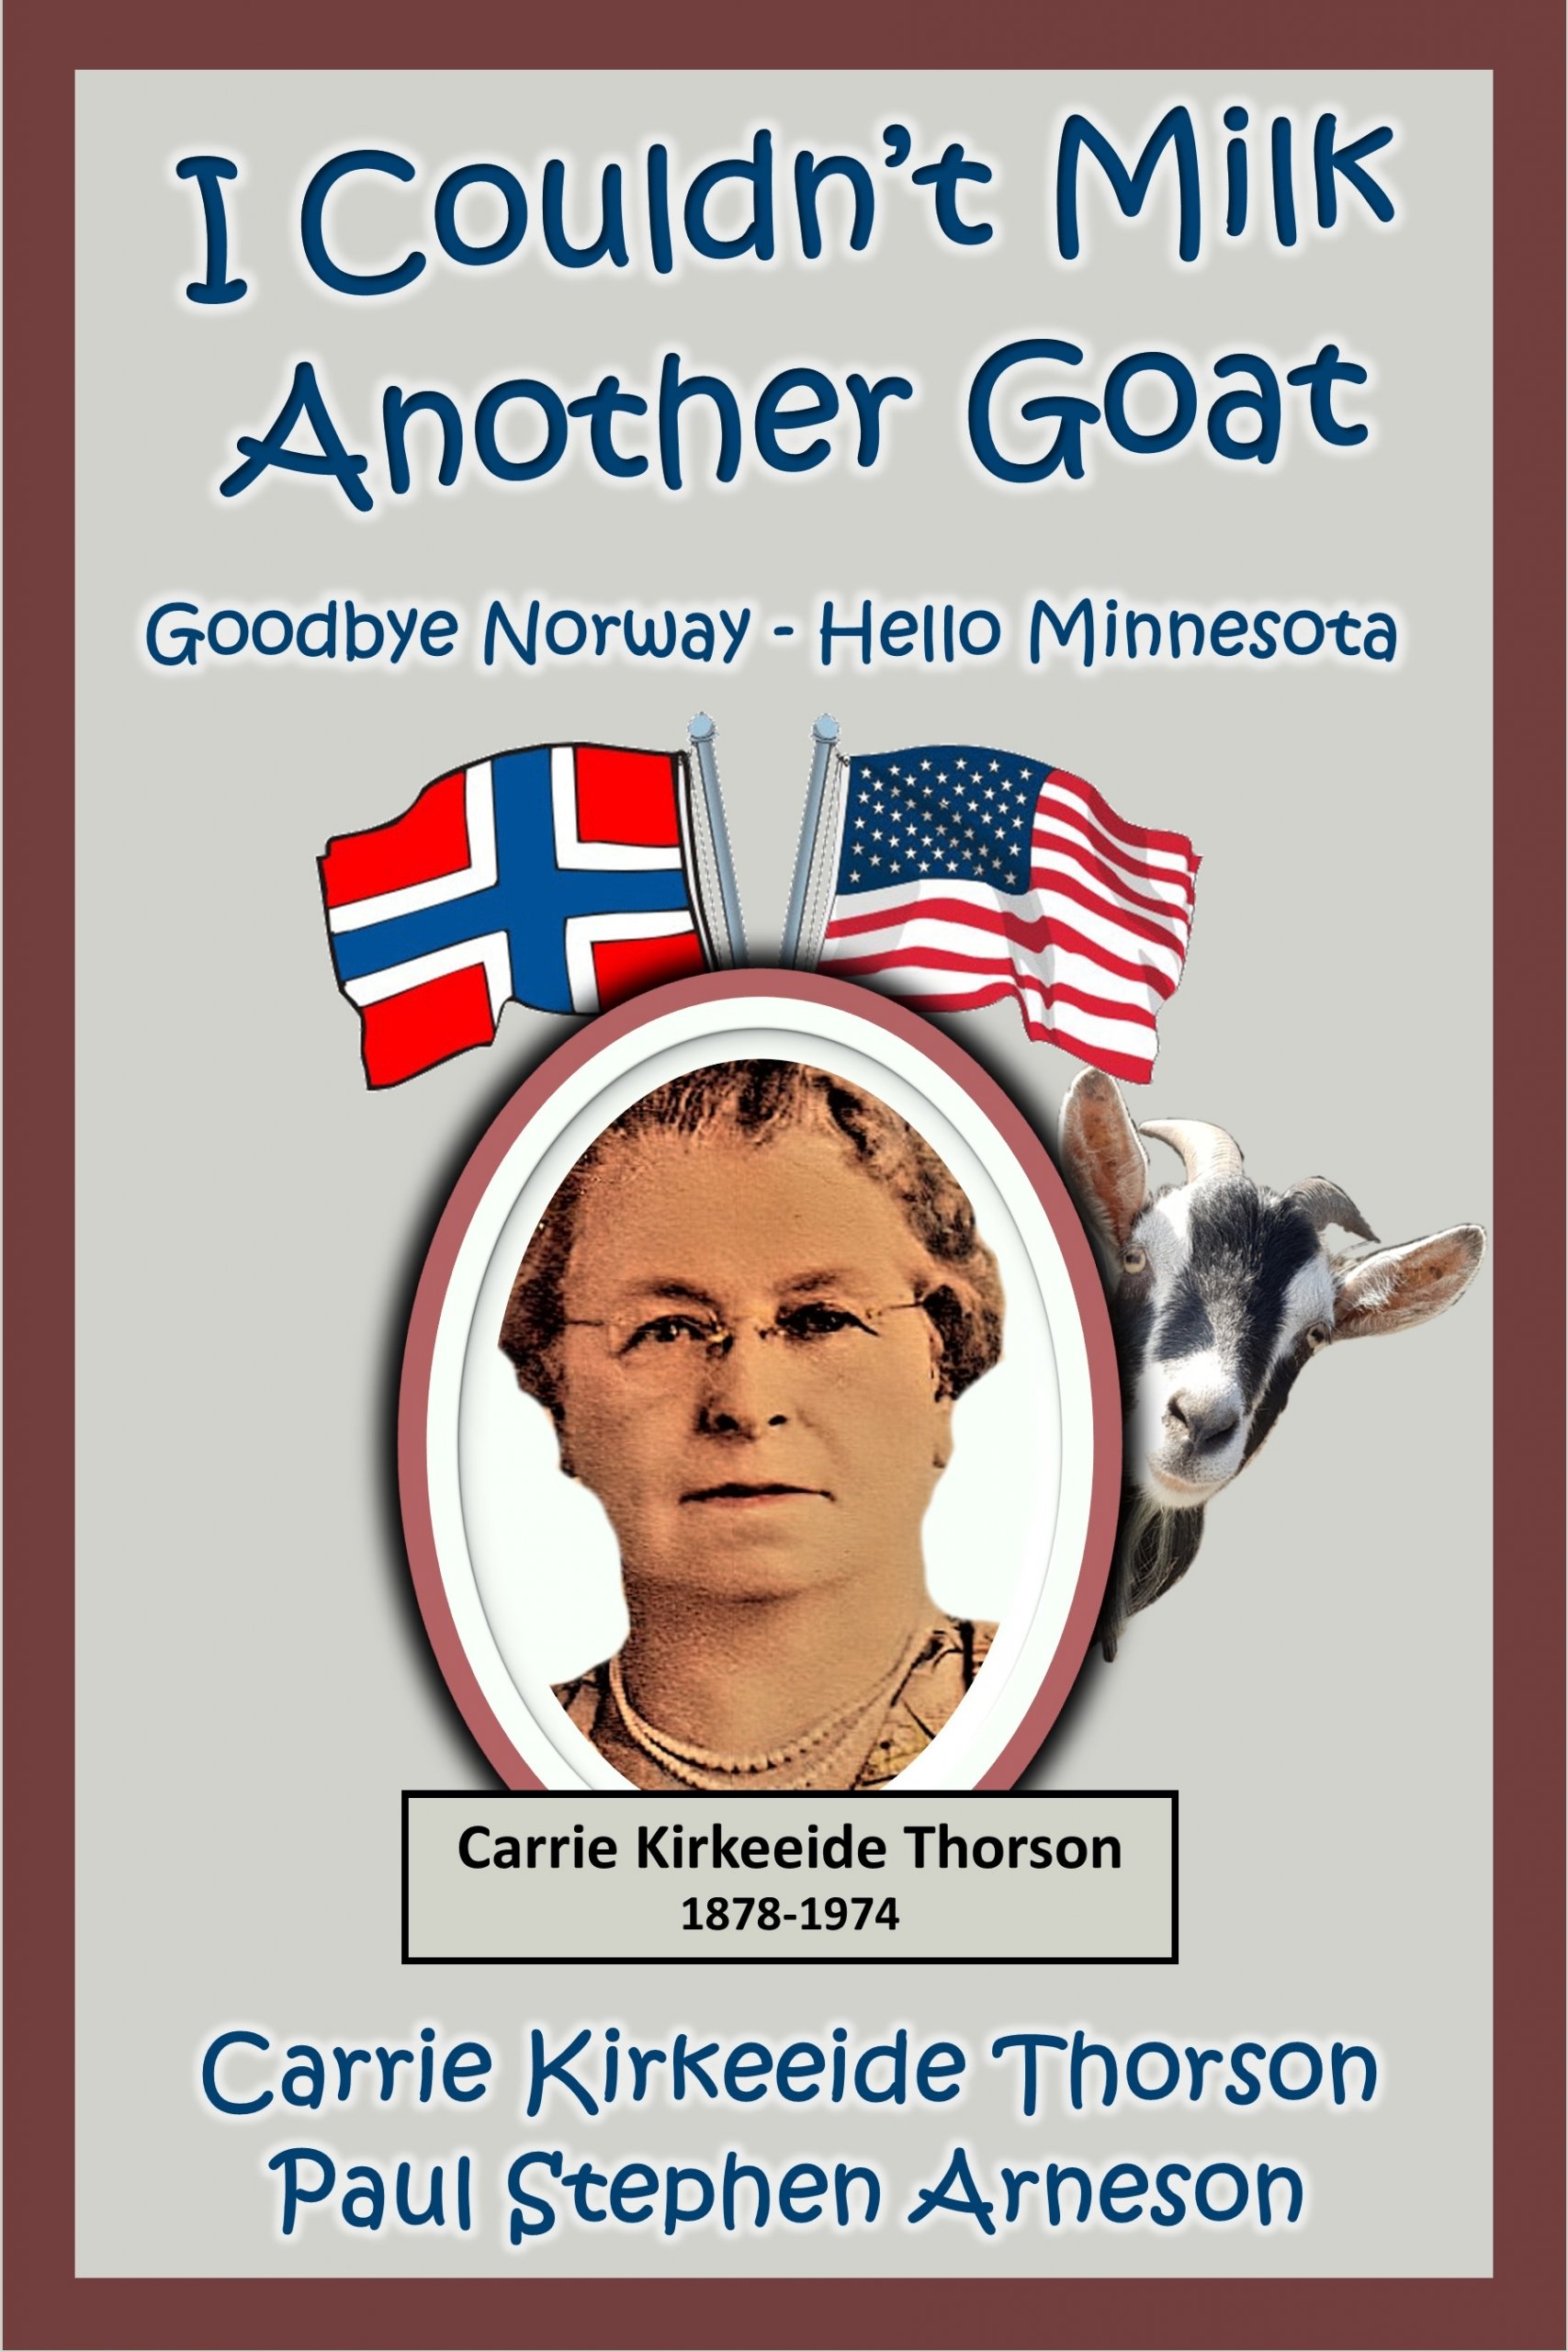 book cover of "I couldn't milk another goat" with a portrait of a woman, the Norwegian flag, the U.S. flag and a goat